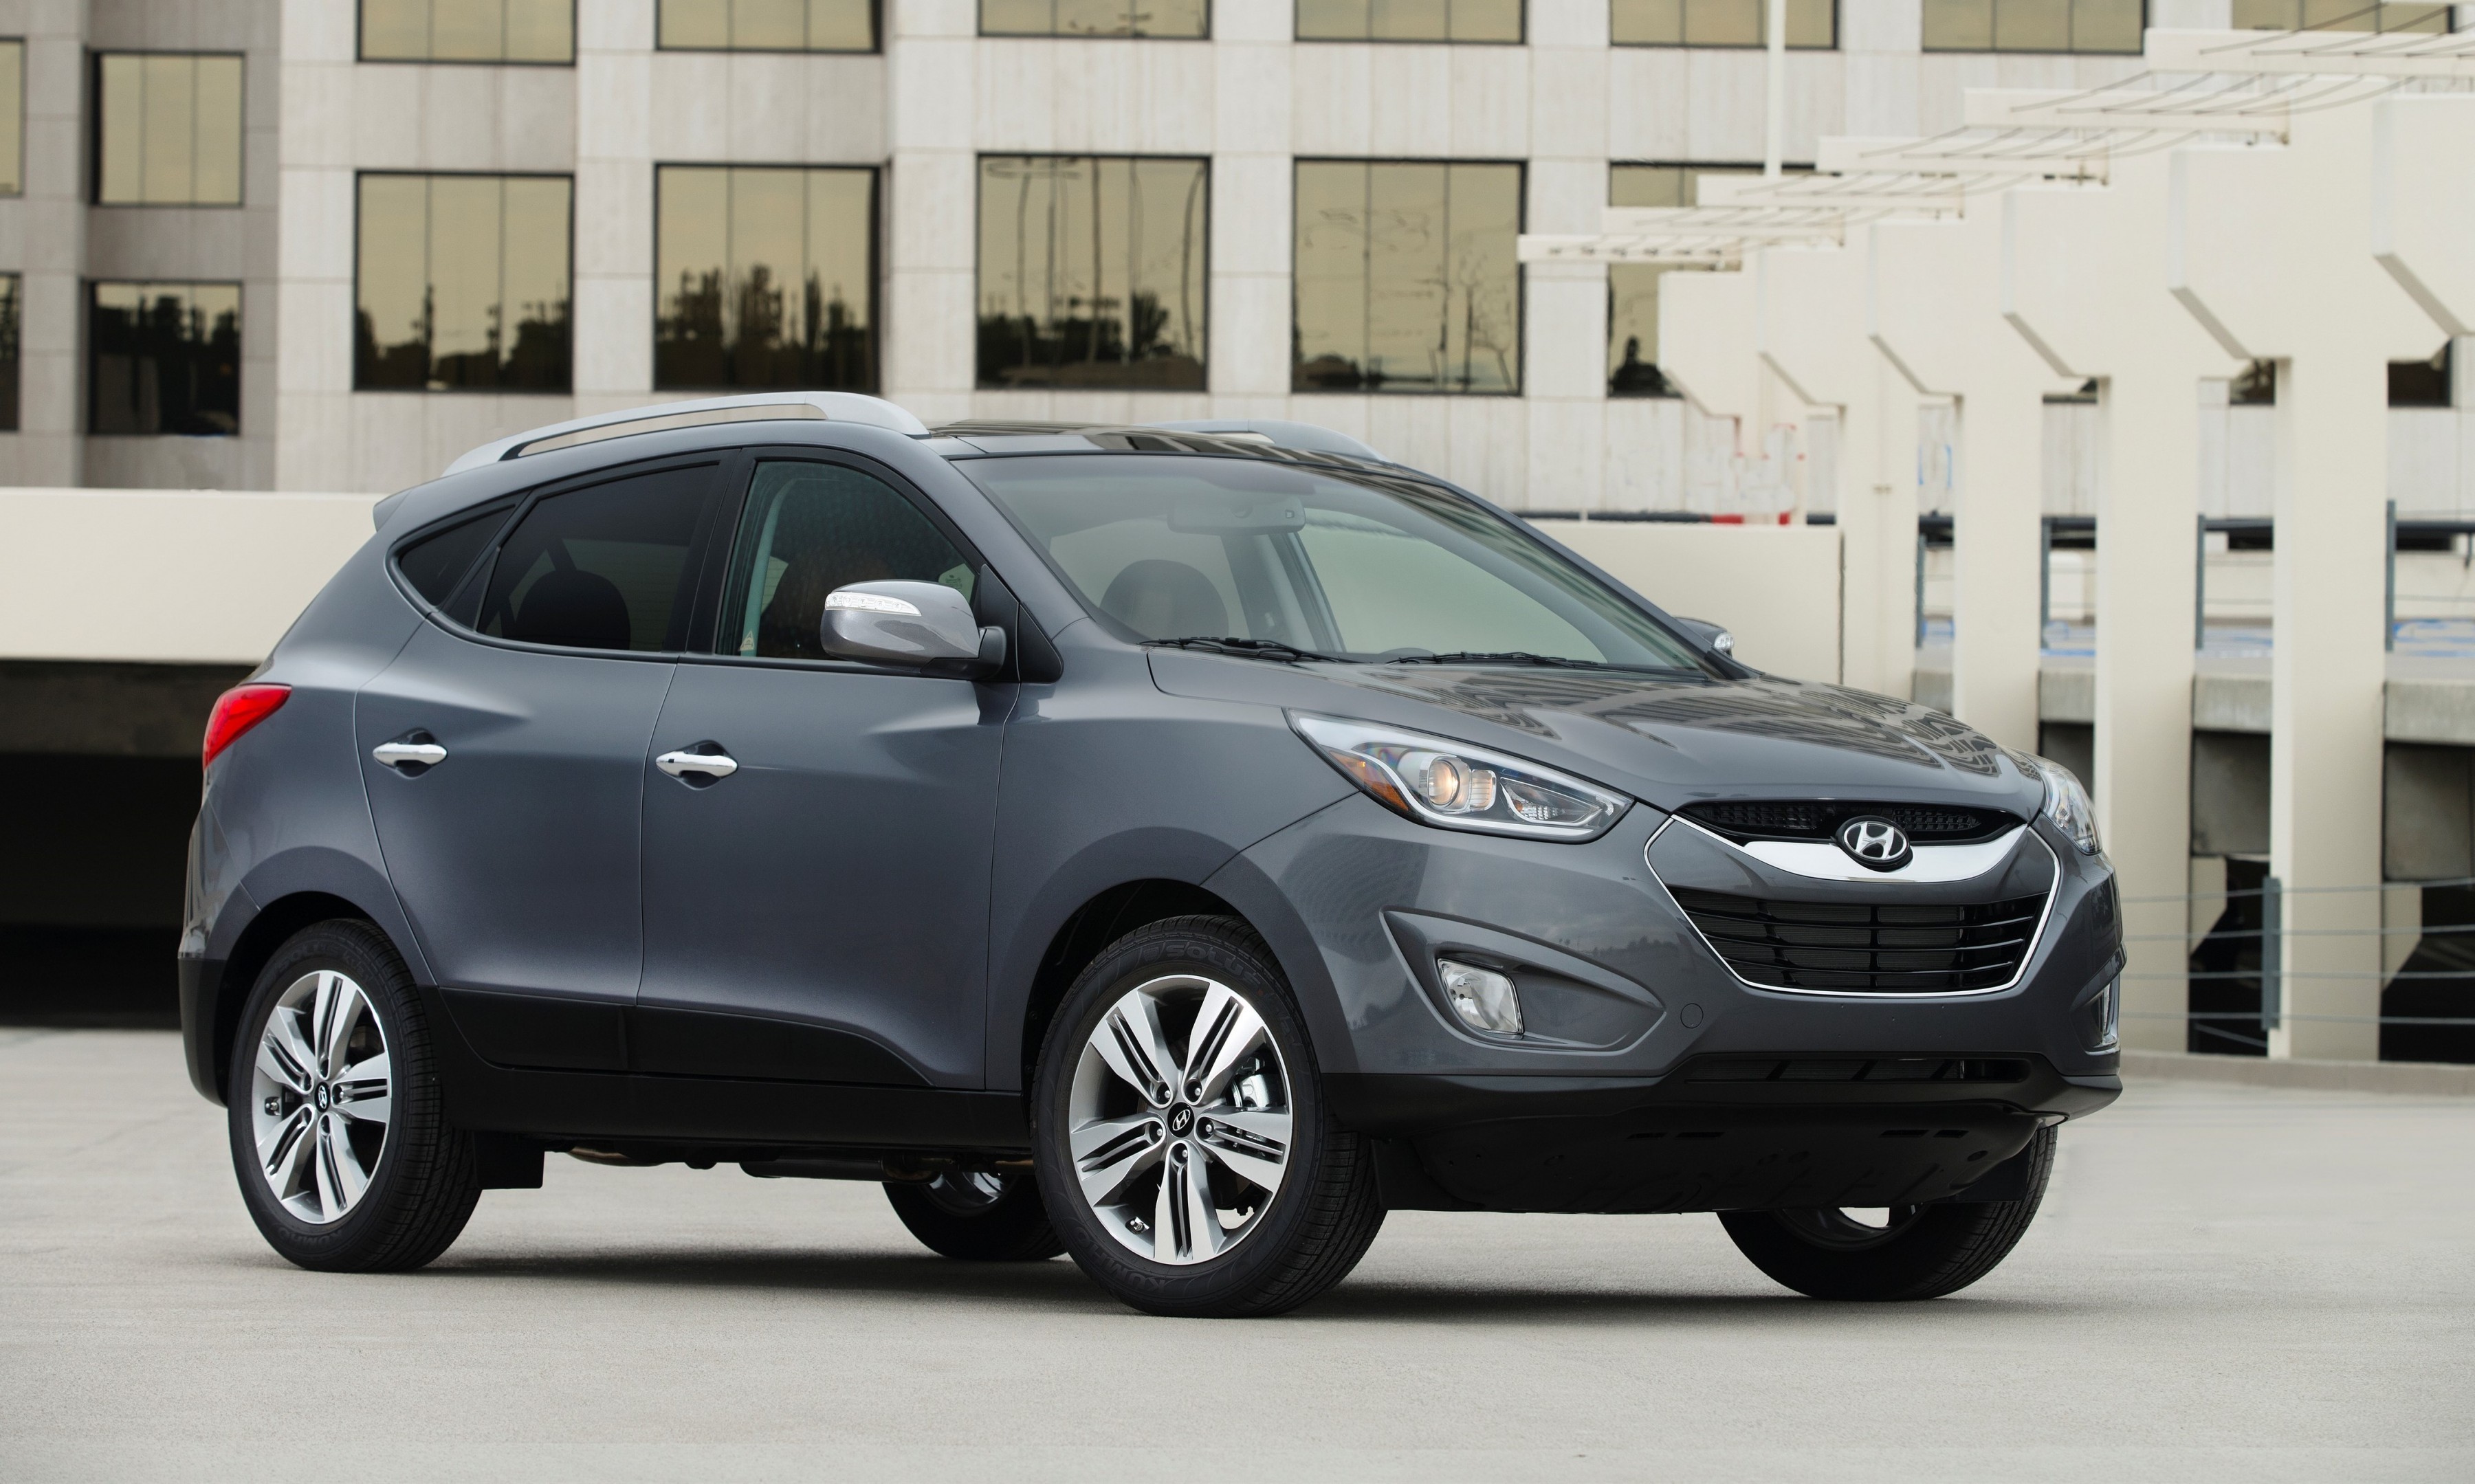 2015 Hyundai Tucson is Trendy Crossover With Loaded